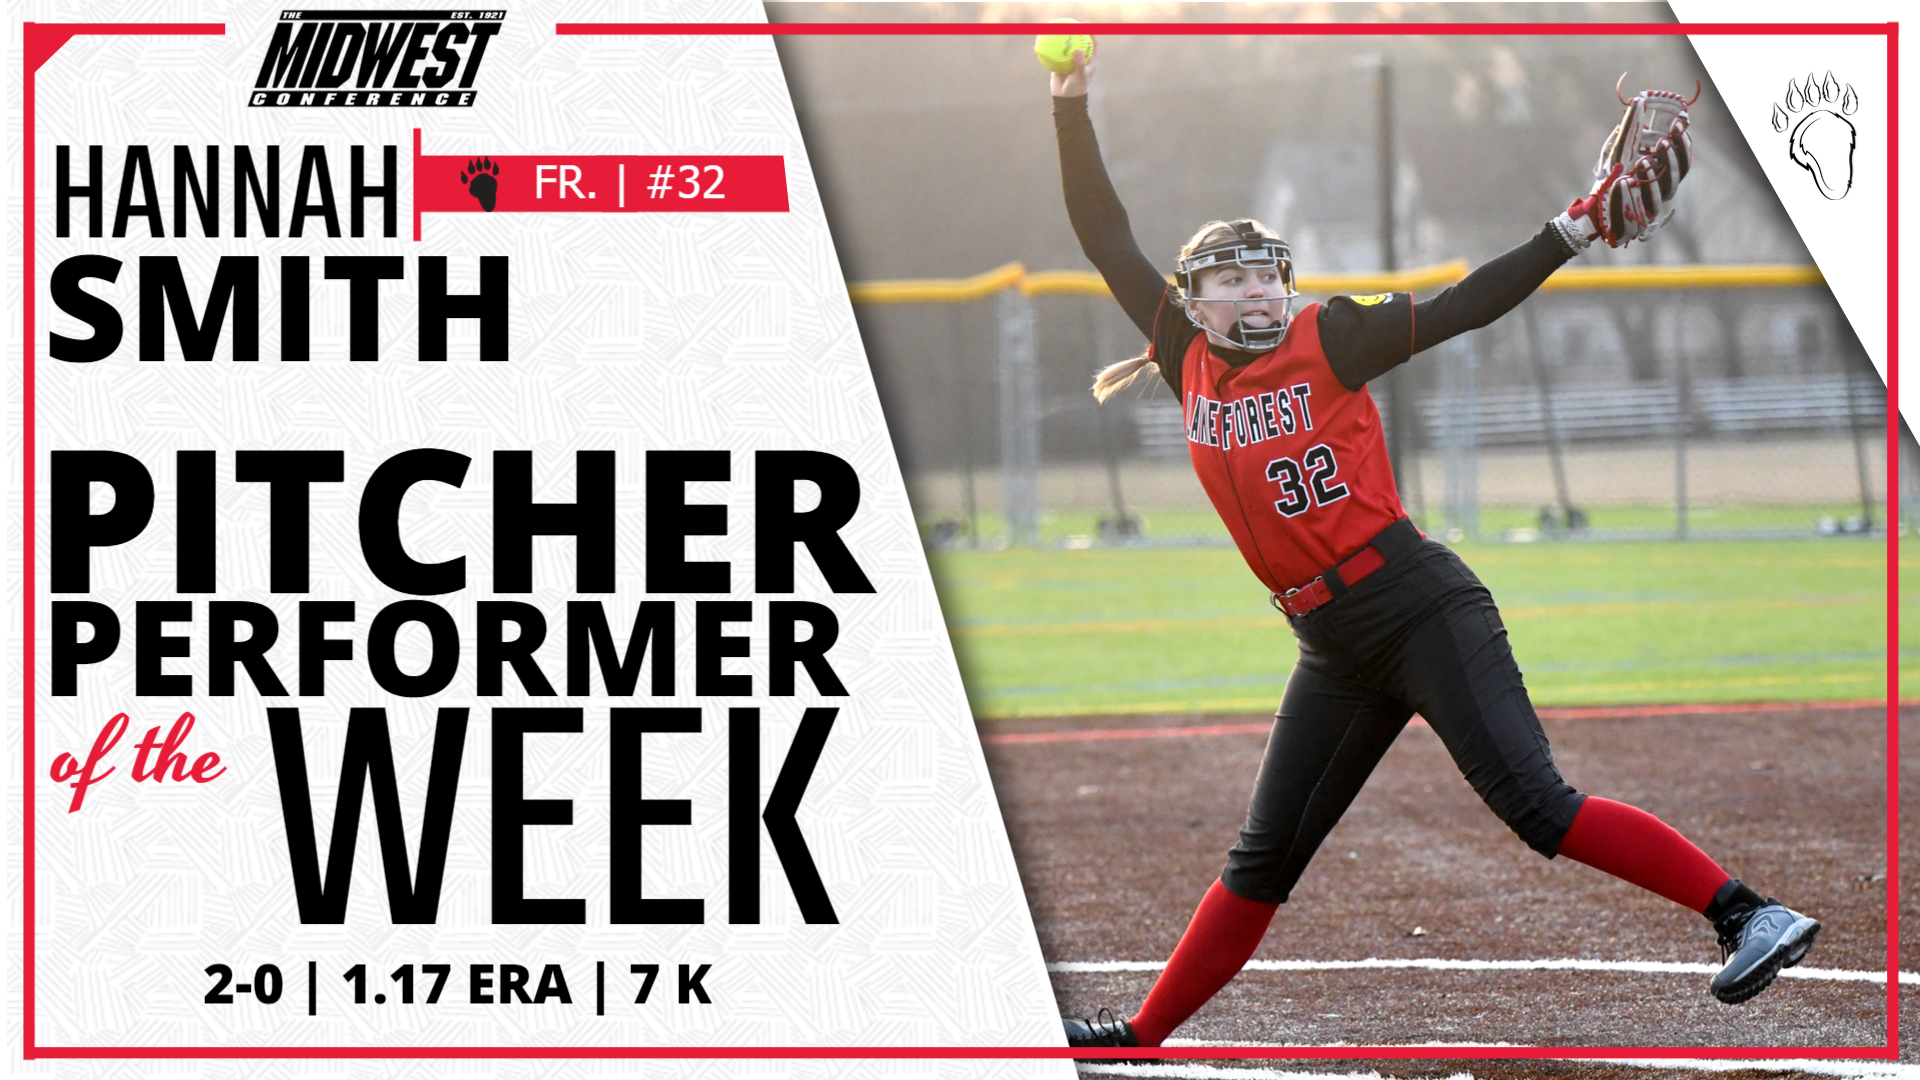 Hannah Smith Named MWC Pitcher Performer of the Week